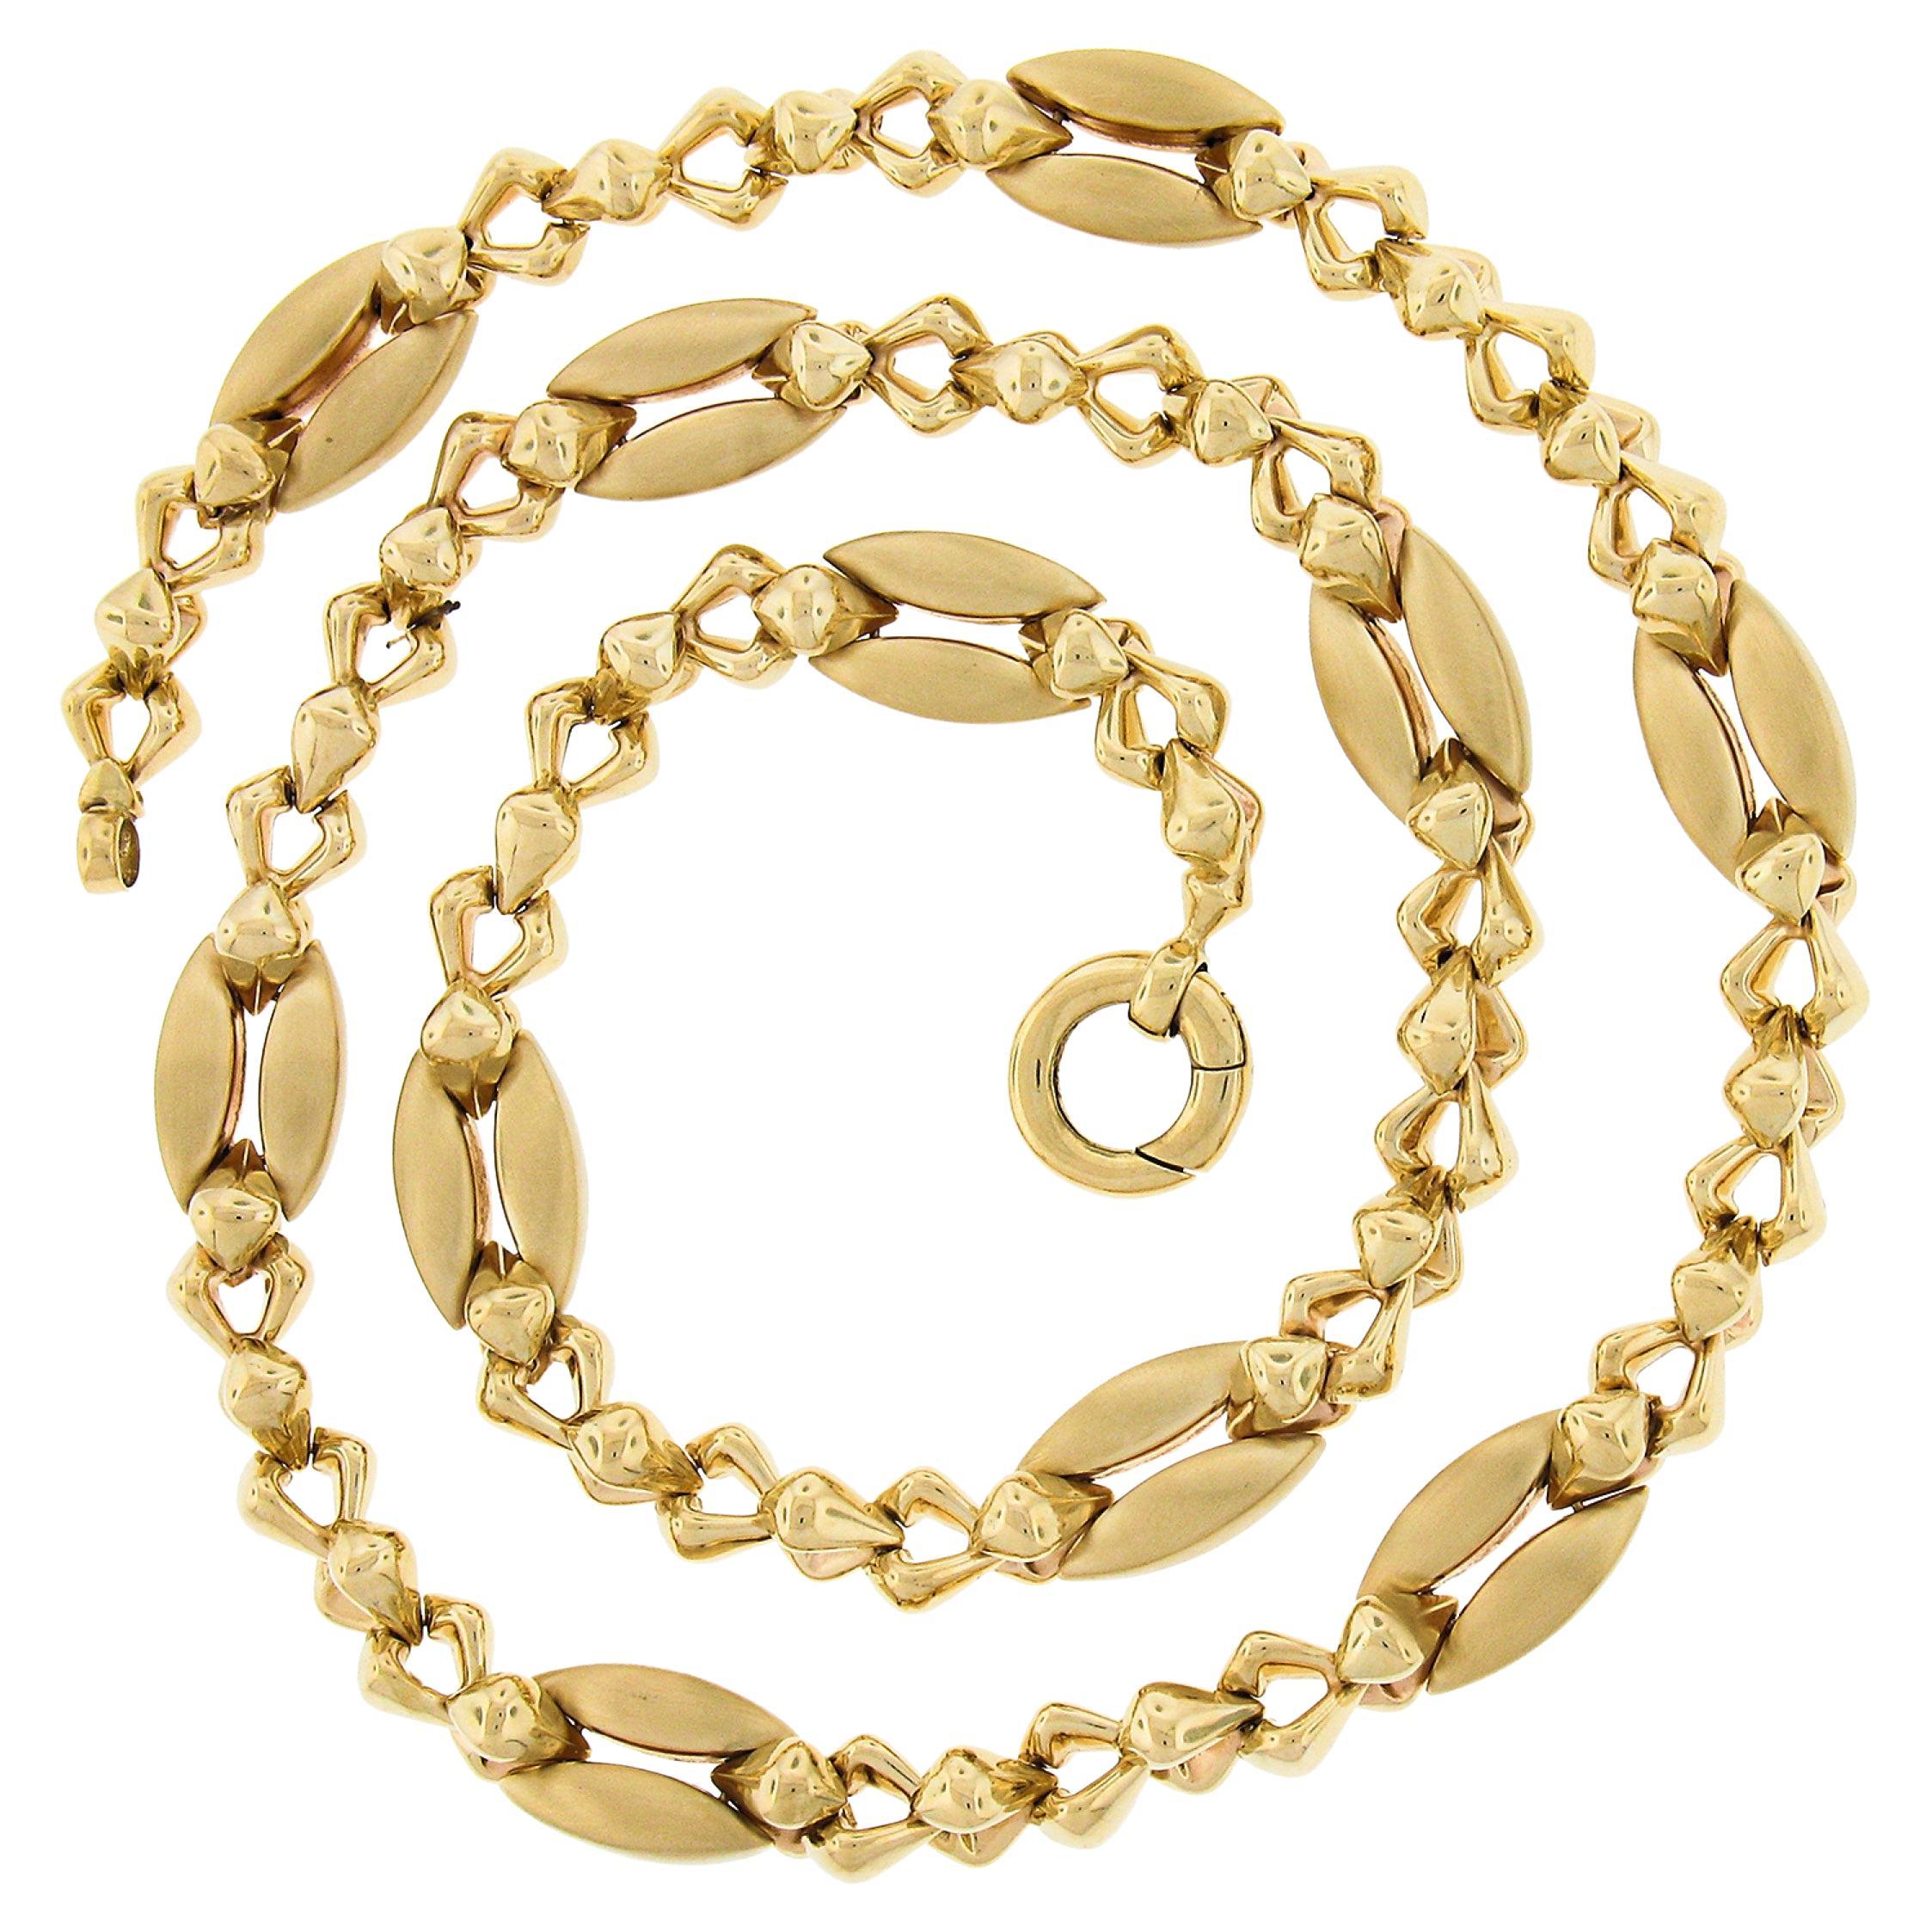 Fancy 14K Gold Long Alternating Polished & Brushed Sections Link Chain Necklace For Sale